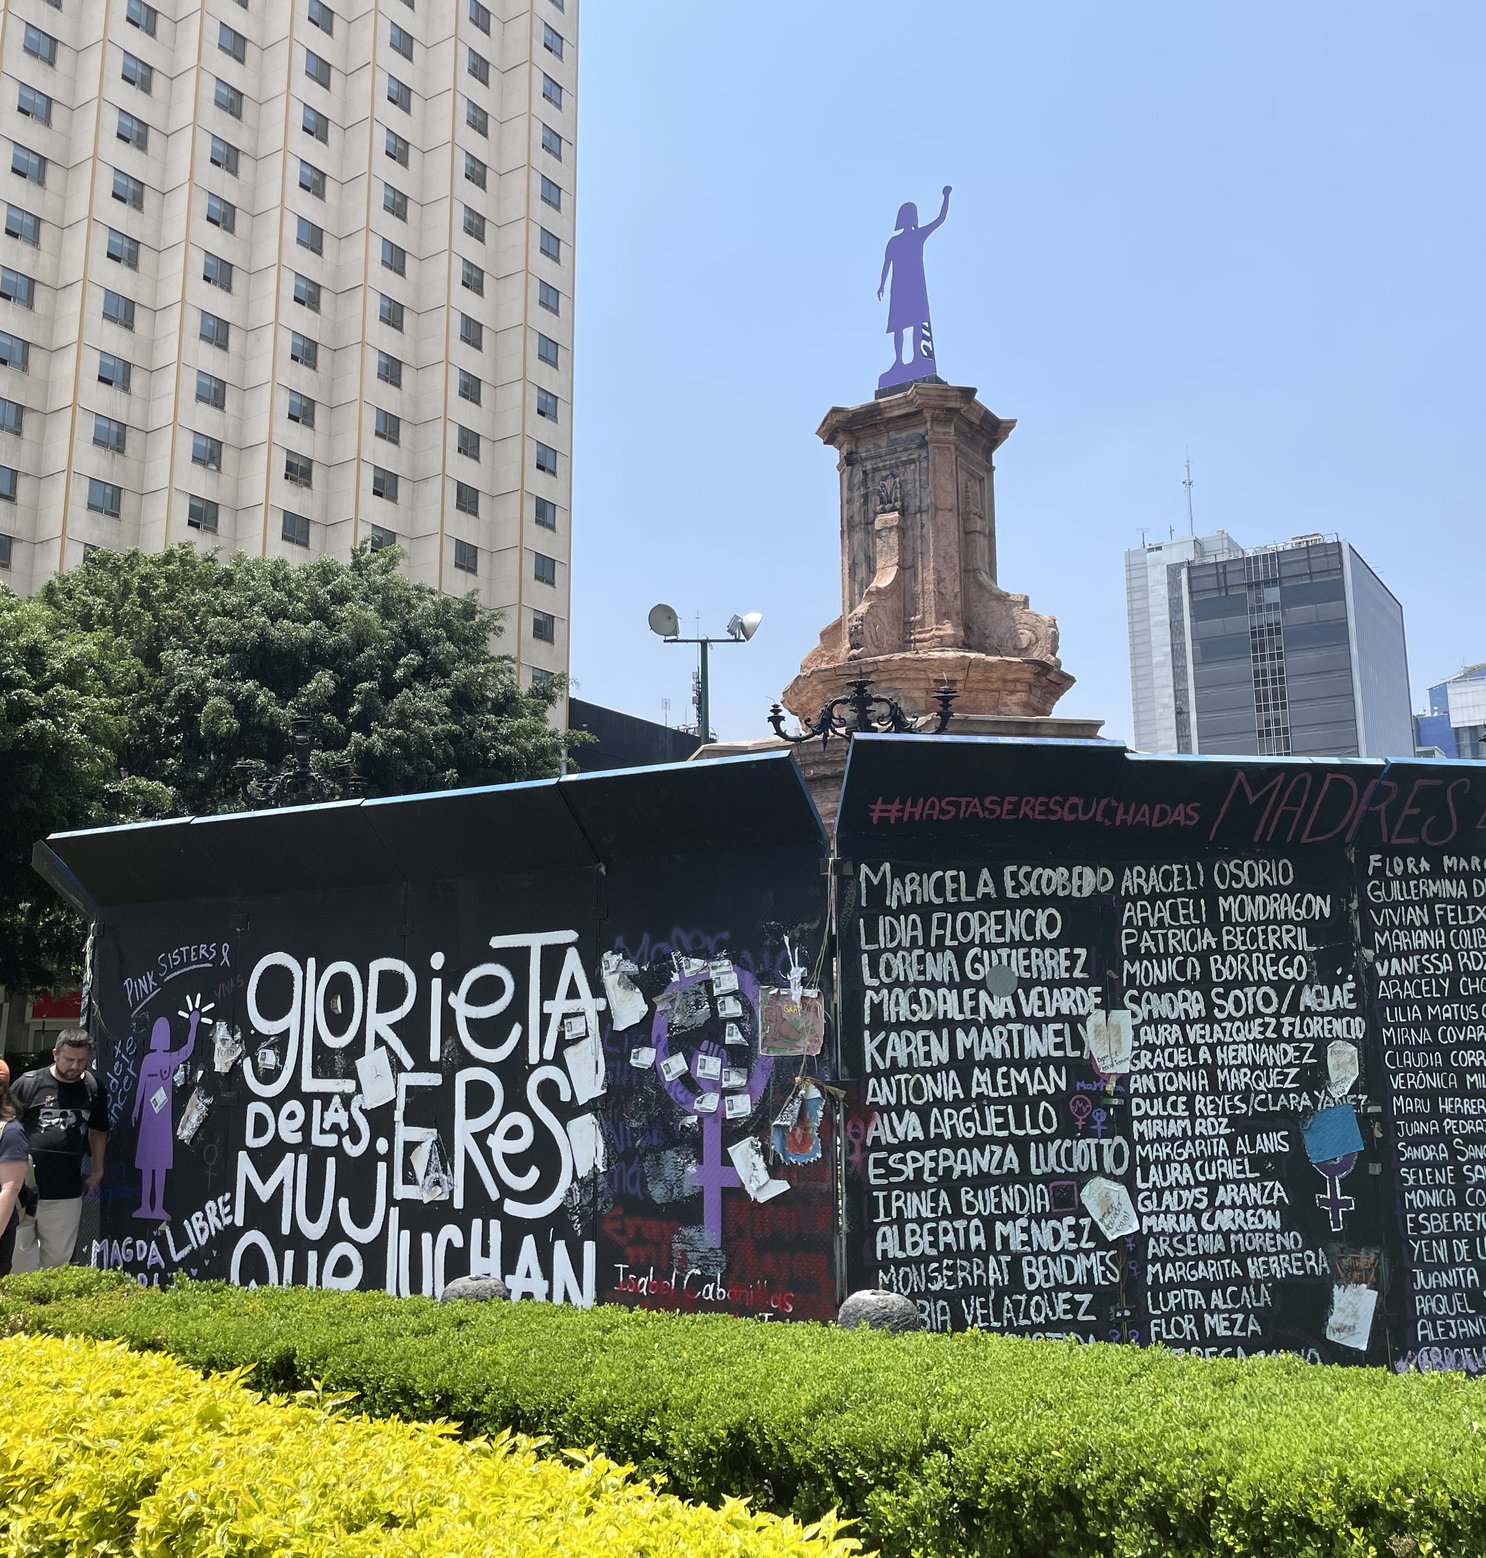   Feminist activists planted this wooden, purple representation of a woman with the cry “Justicia” on her back. On its base are the names of women who have fought for their rights.  